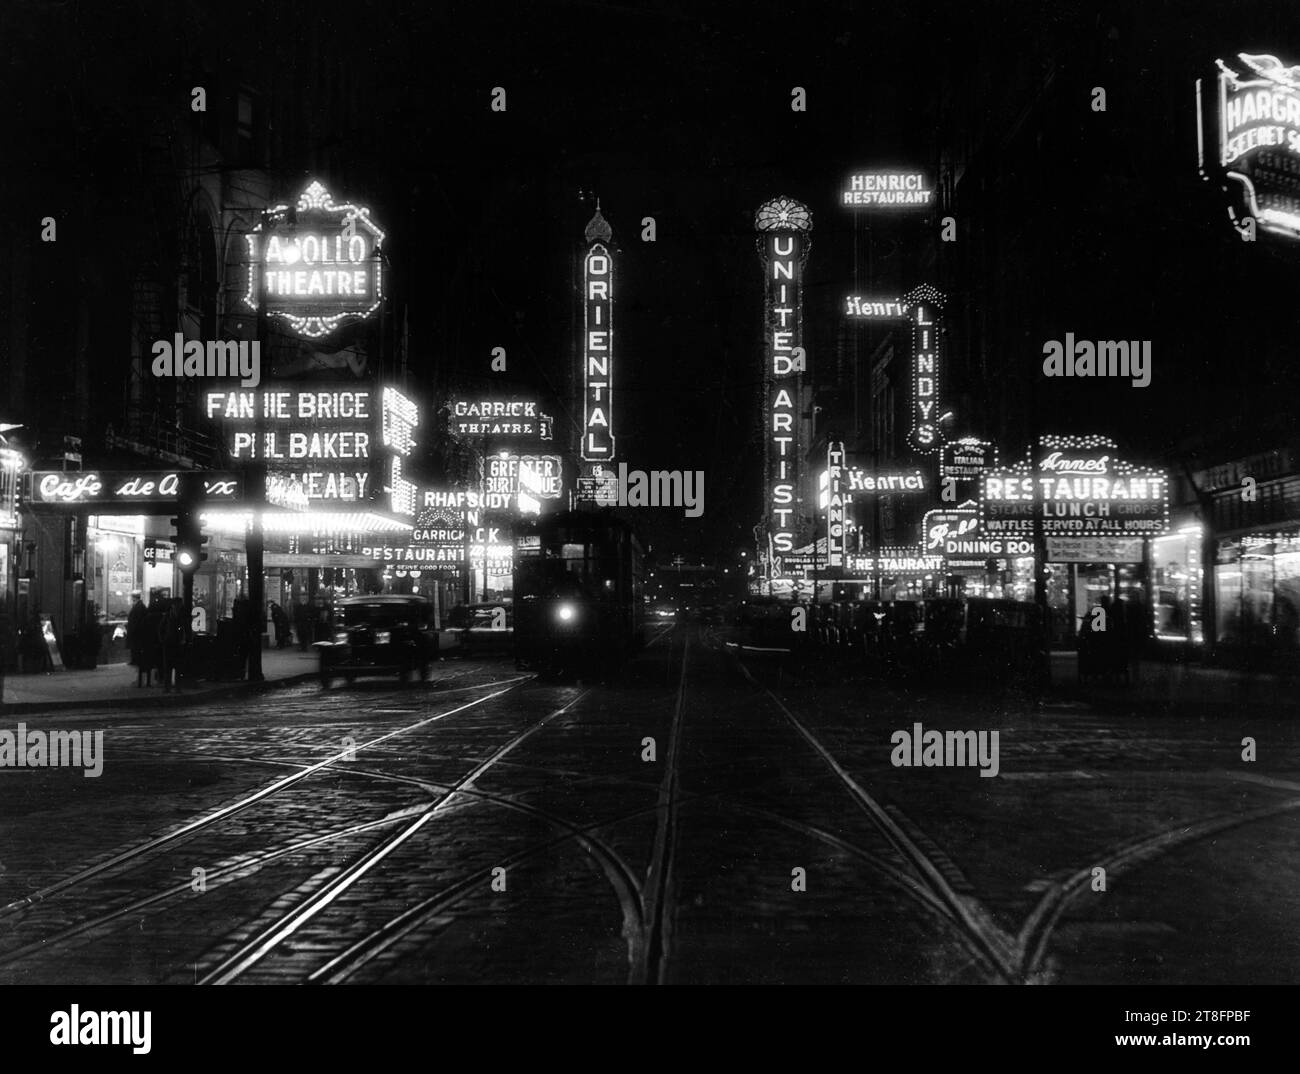 Chicago's theater row on Randolph Street looking east in downtown Chicago, circa 1920. Theaters pictured include the Oriental, the United Artists, the Garrick, and the Apollo. Stock Photo